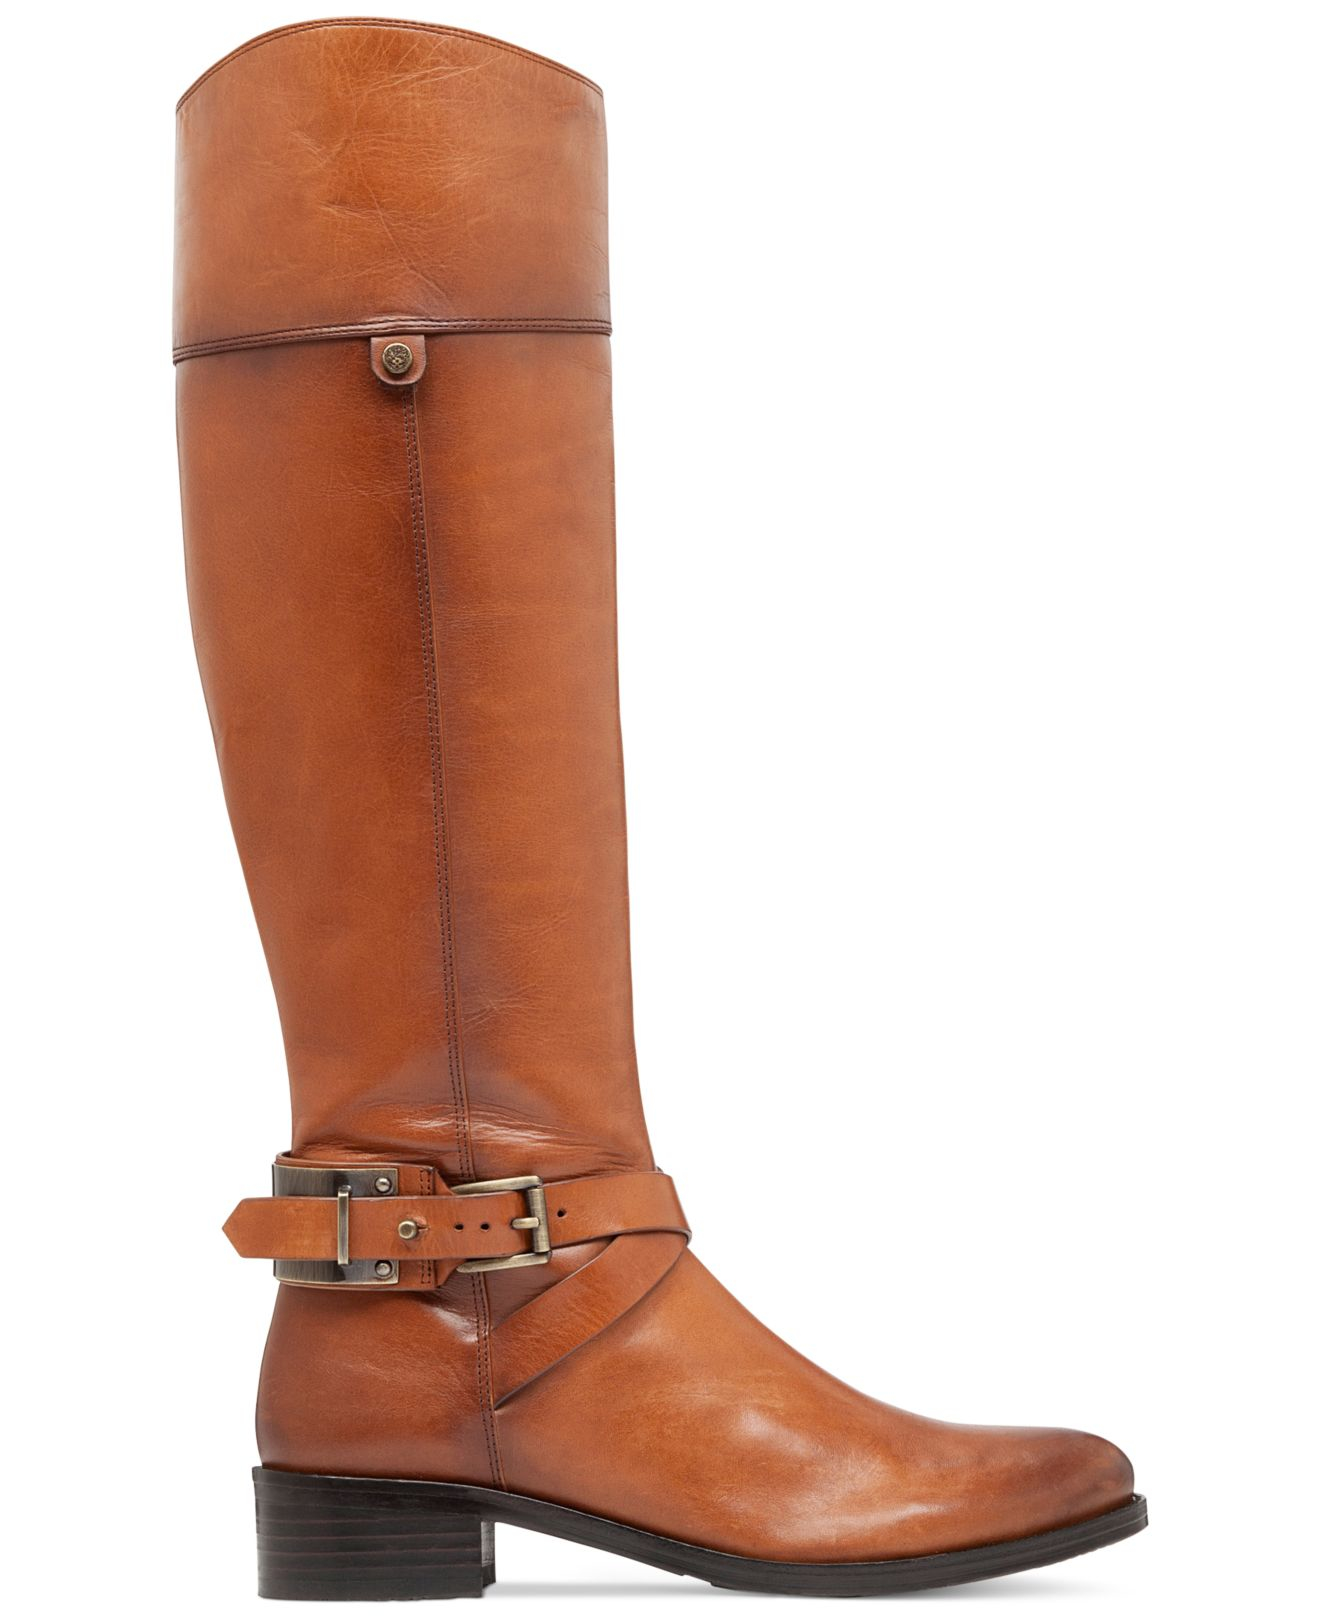 Vince Camuto Leather Jaran Wide Calf Riding Boots in Brown - Lyst